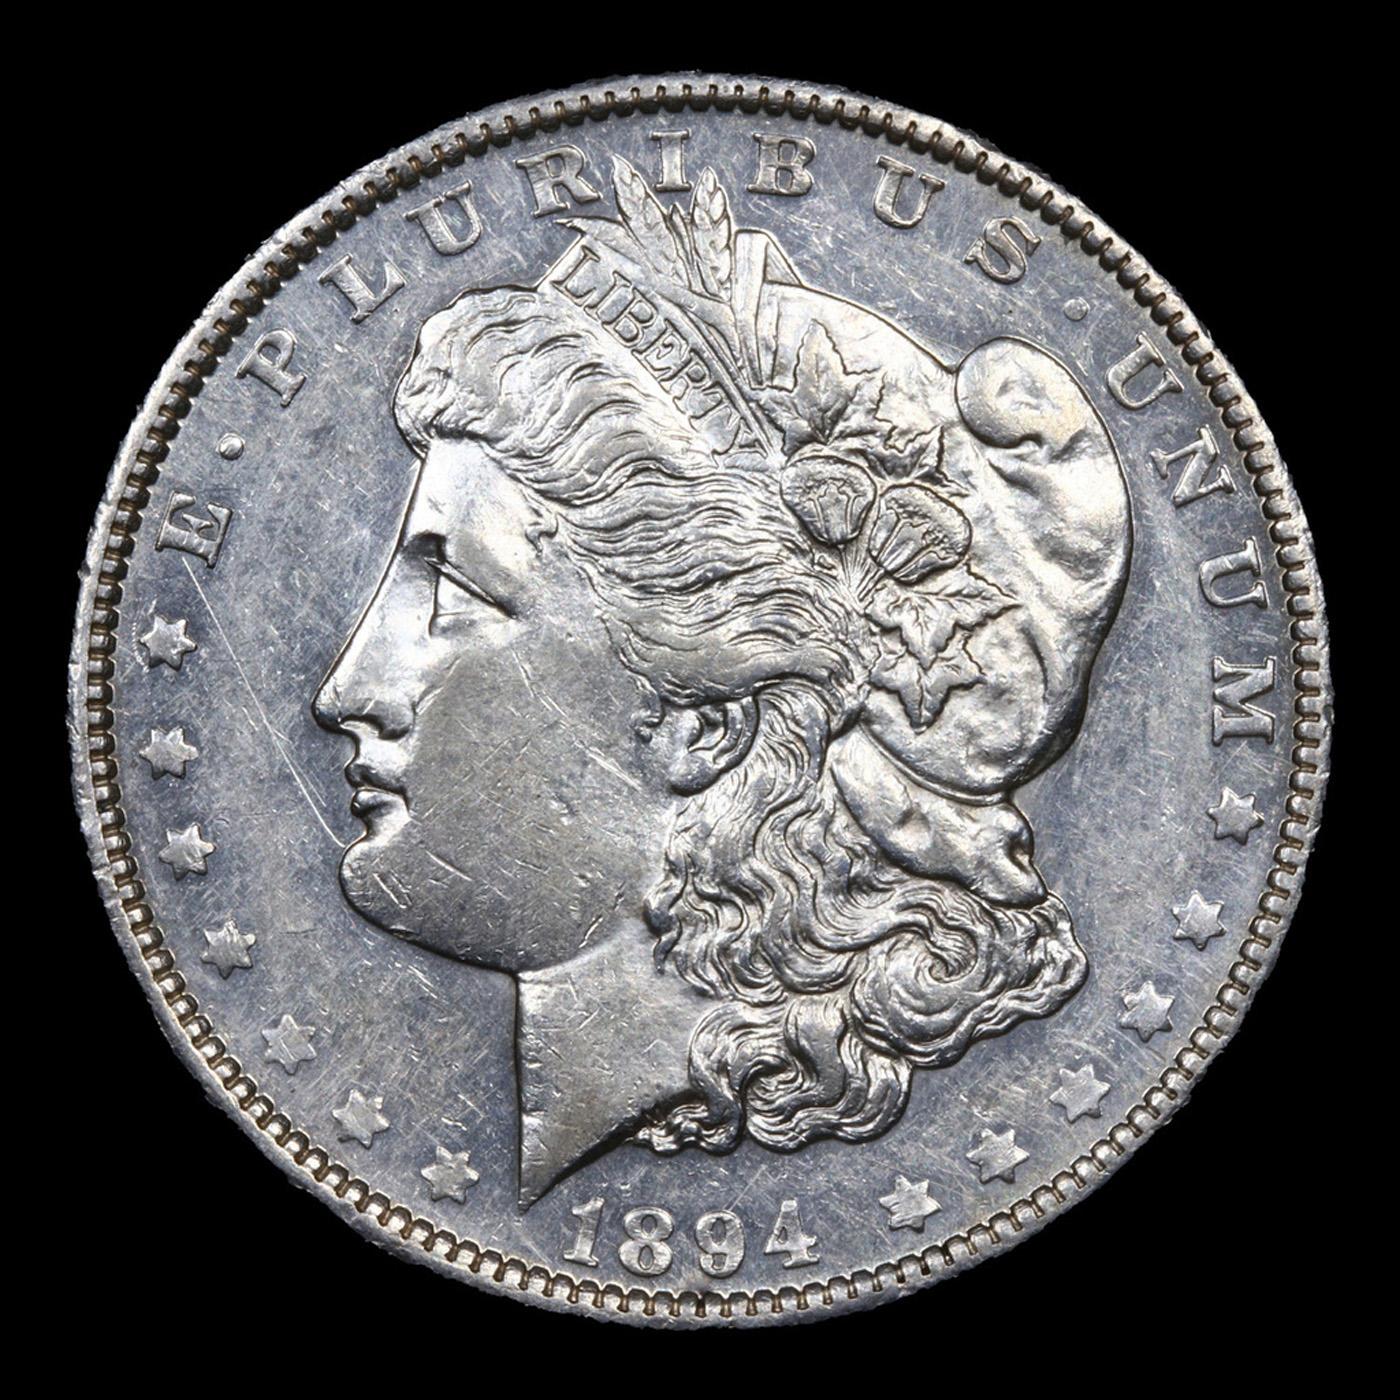 ***Auction Highlight*** 1894-o Morgan Dollar $1 Graded Select Unc PL By USCG (fc)